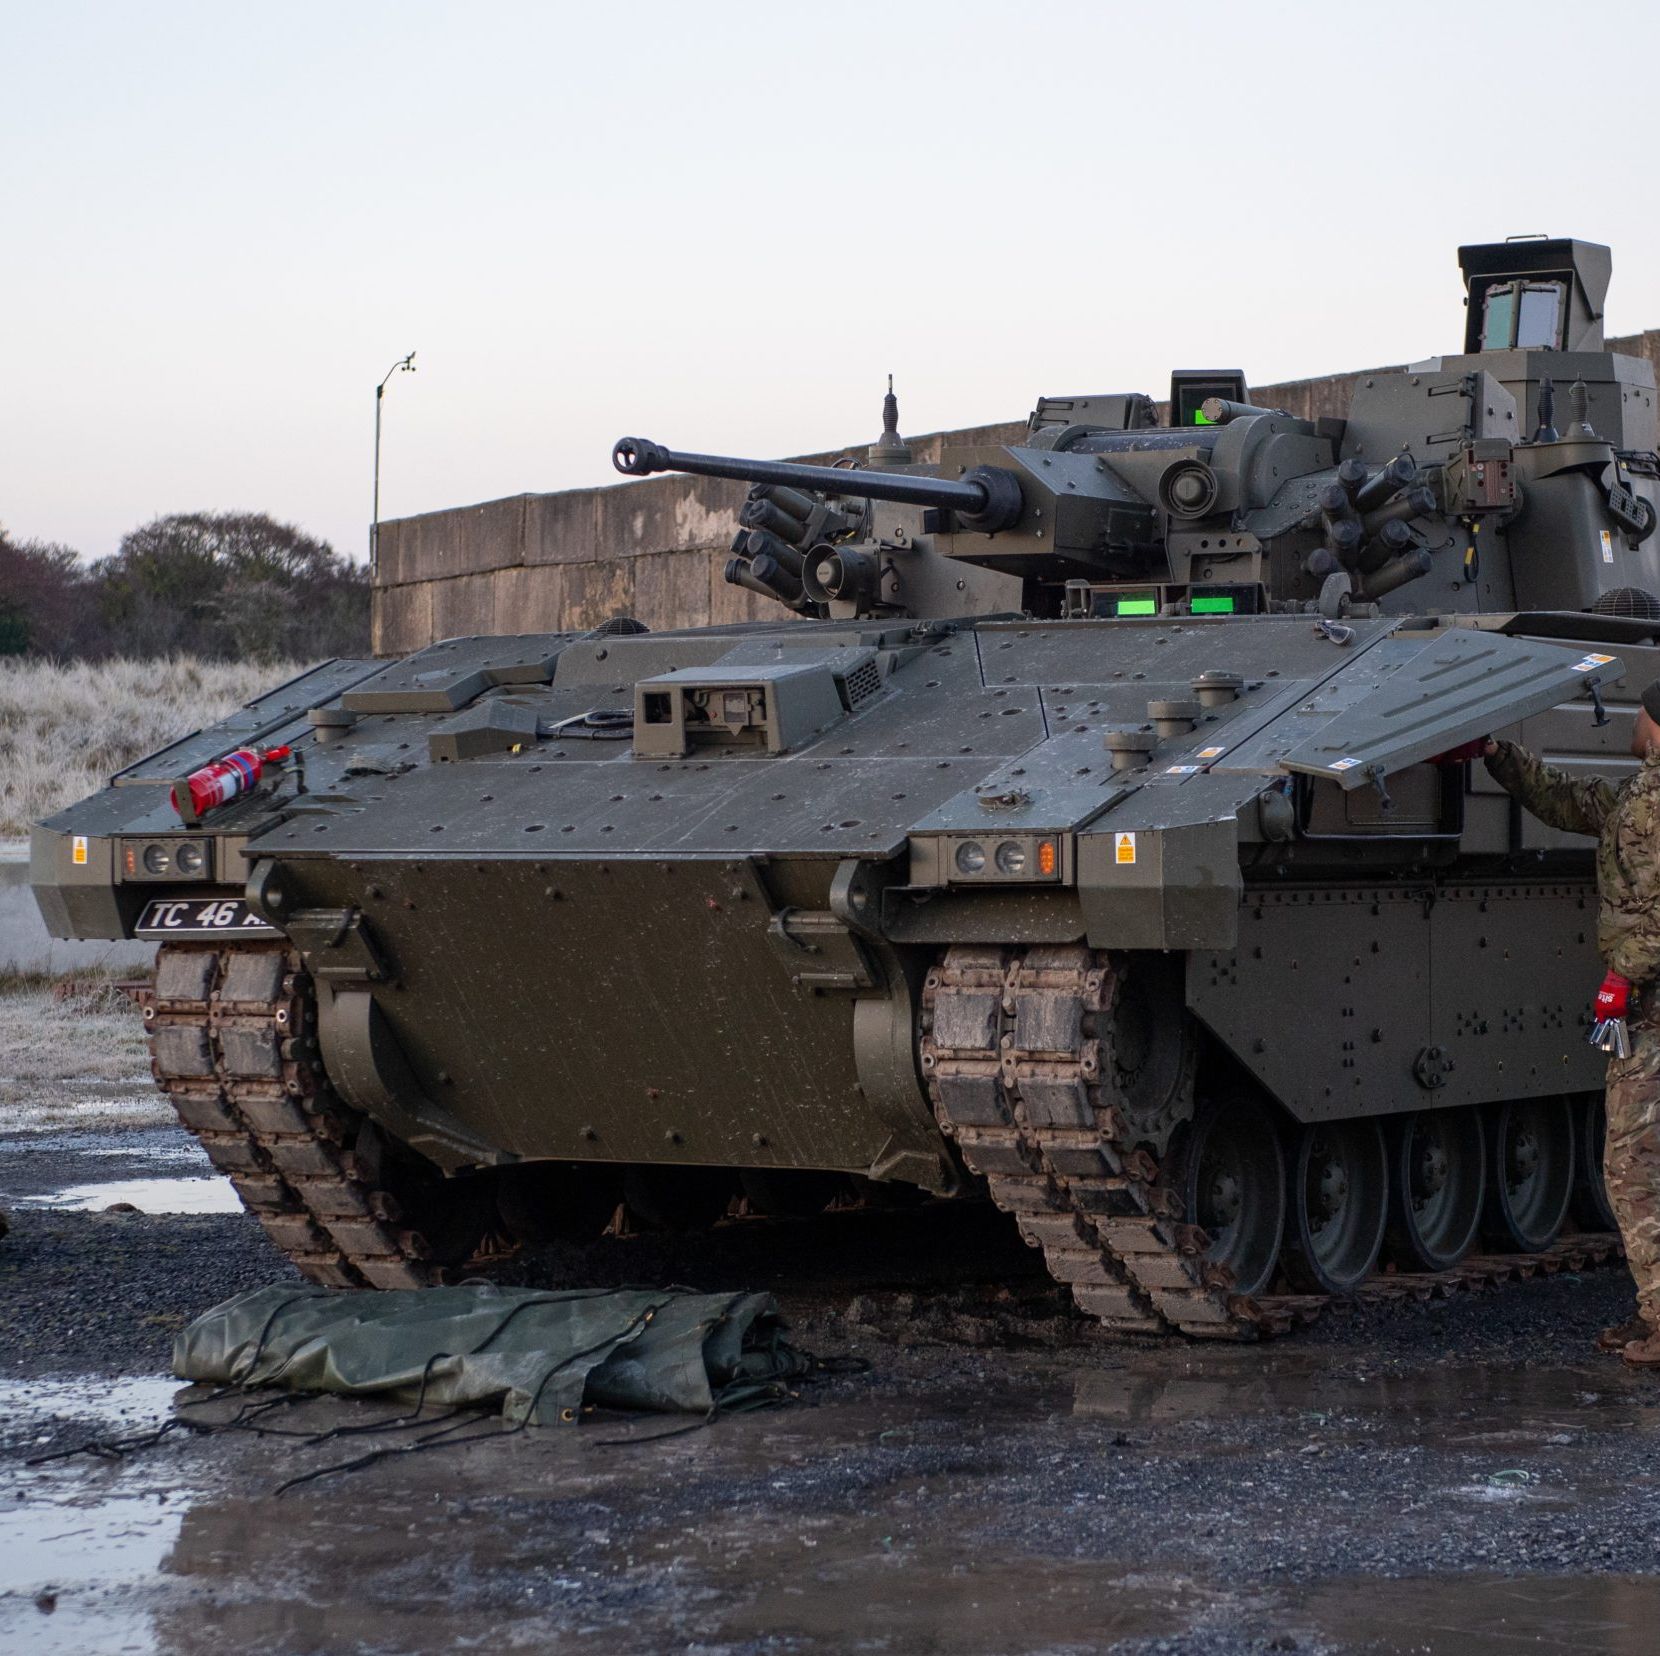 The British Army's New Armored Vehicle Is So Bad, It's Making Soldiers Sick